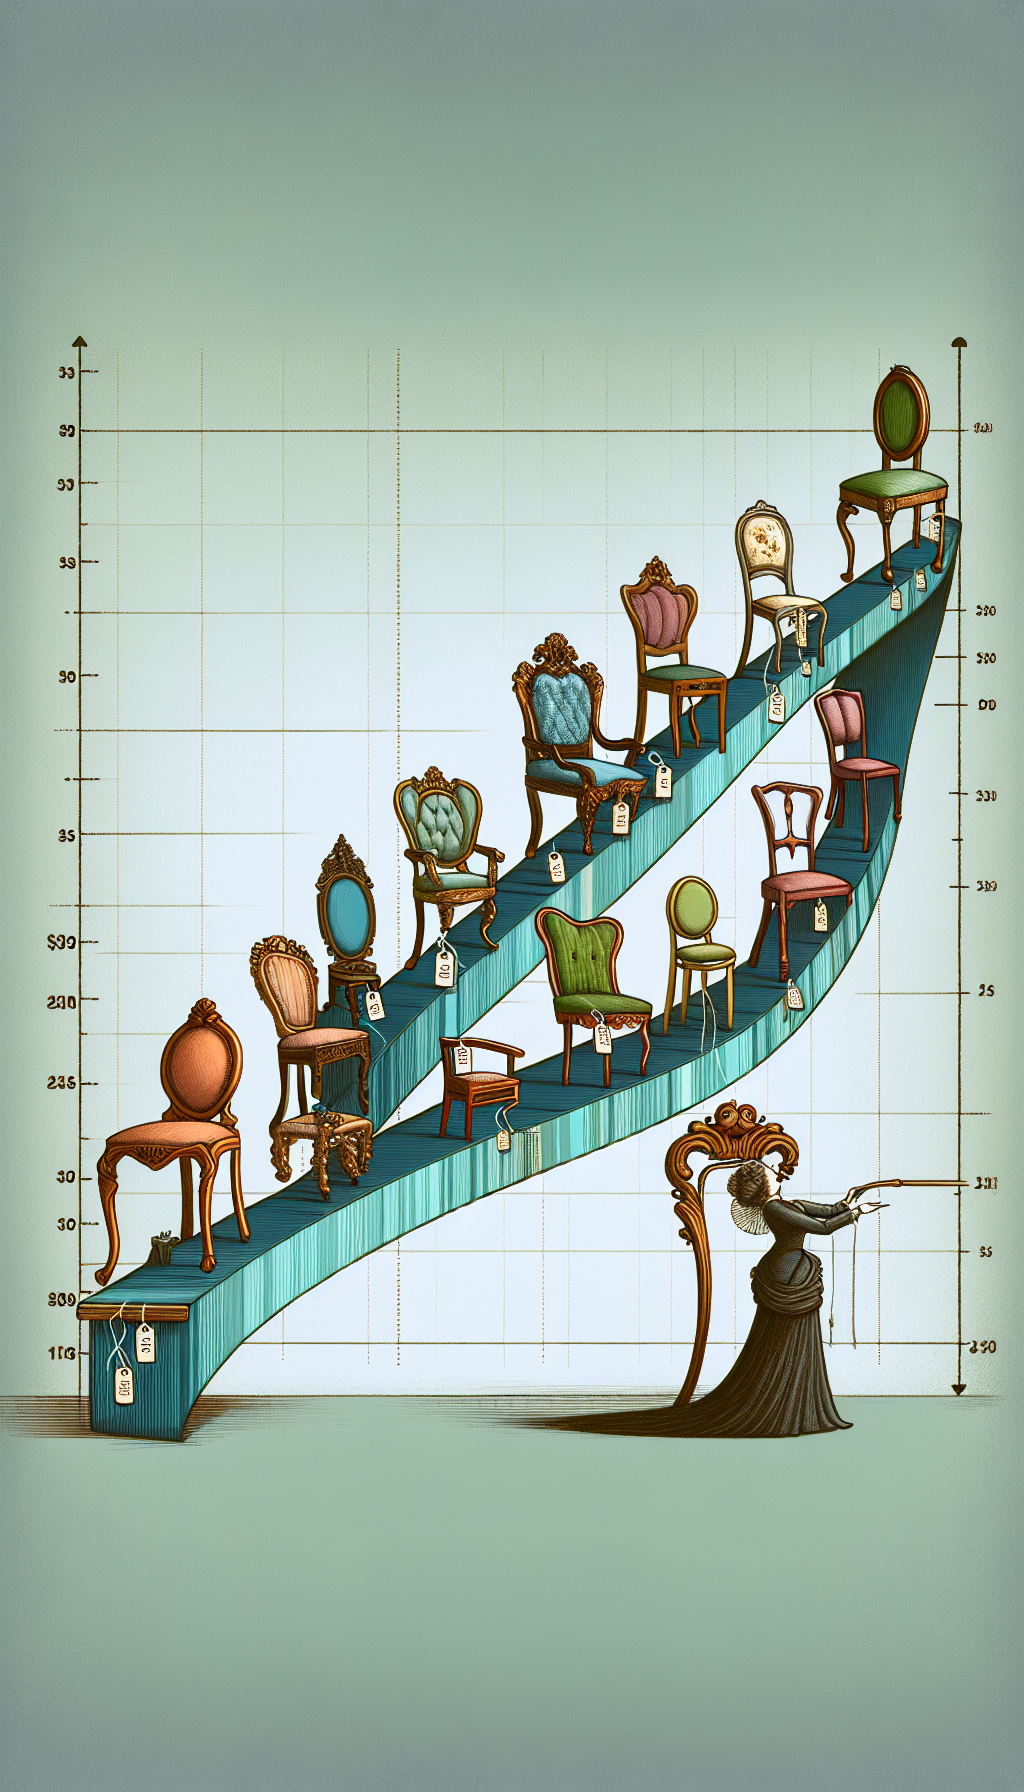 An illustration featuring a whimsical timeline ribbon that flows across the scene, adorned with iconic chairs representing different periods (Queen Anne, Victorian, Art Nouveau, etc.). The chairs grow taller like a bar graph as the timeline progresses, symbolizing the increase in antique furniture values over time, with price tags attached to show their escalating worth.